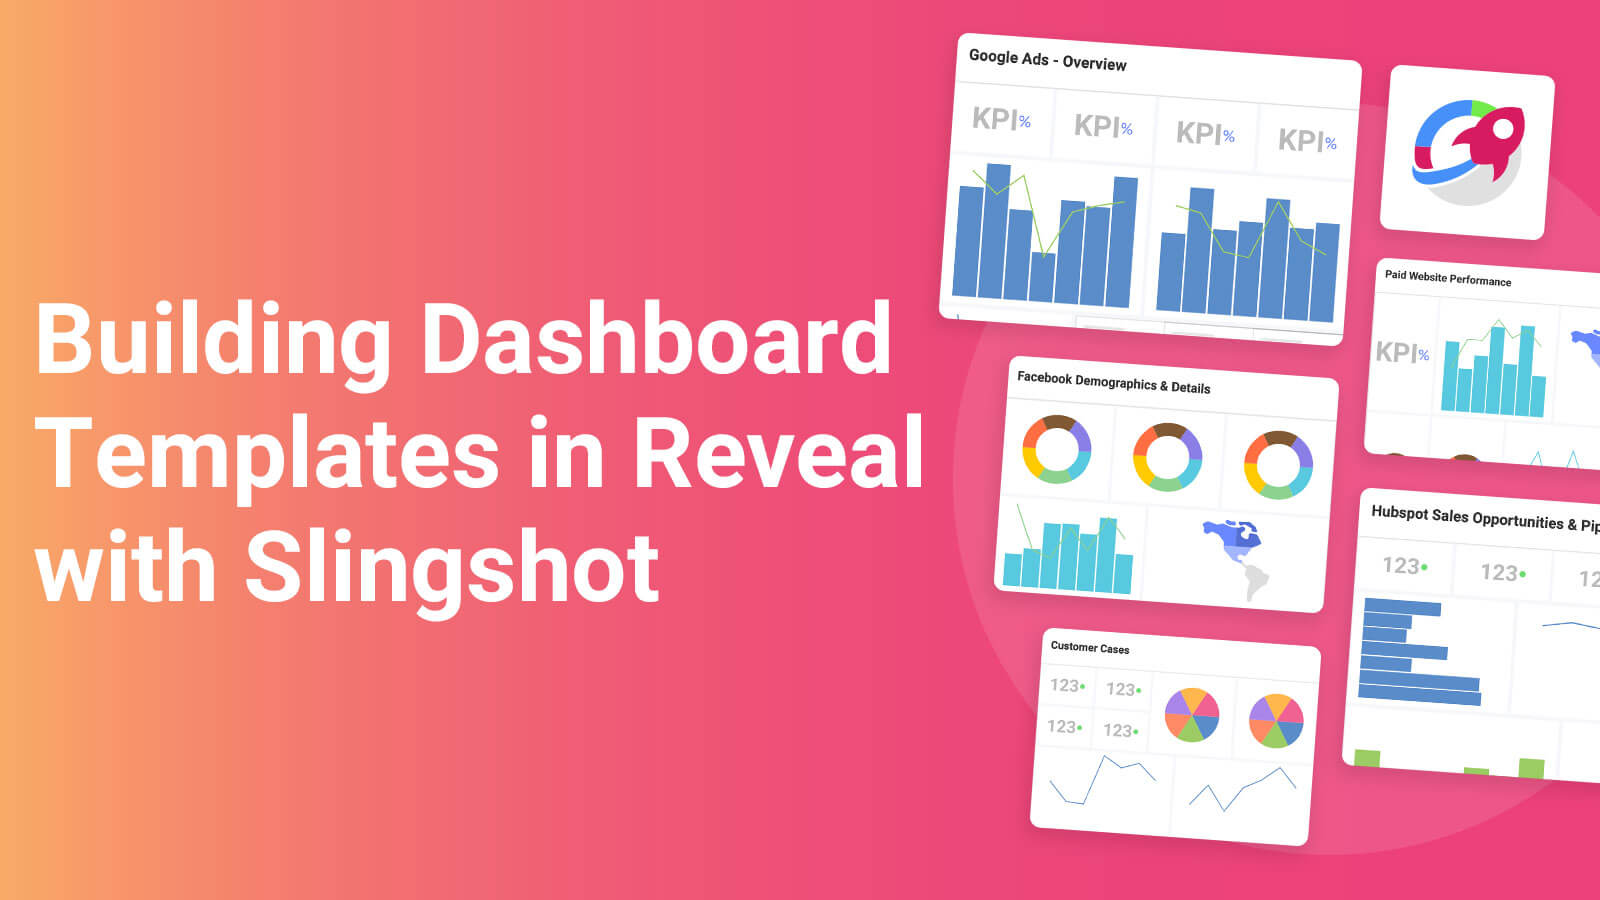 Building Dashboard Templates in Reveal with Slingshot